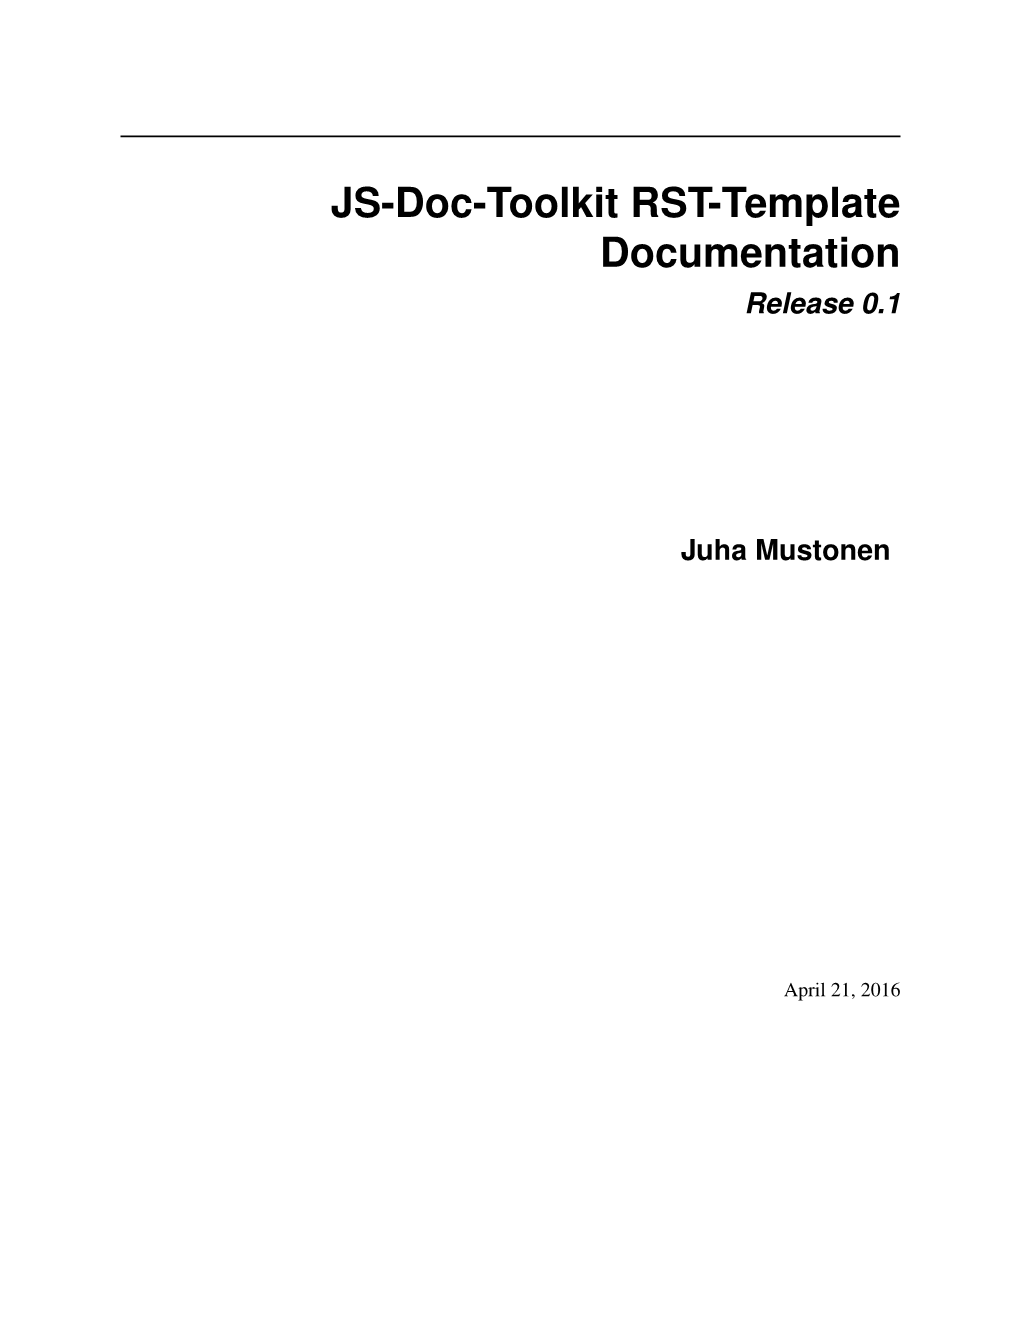 JS-Doc-Toolkit RST-Template Documentation Release 0.1